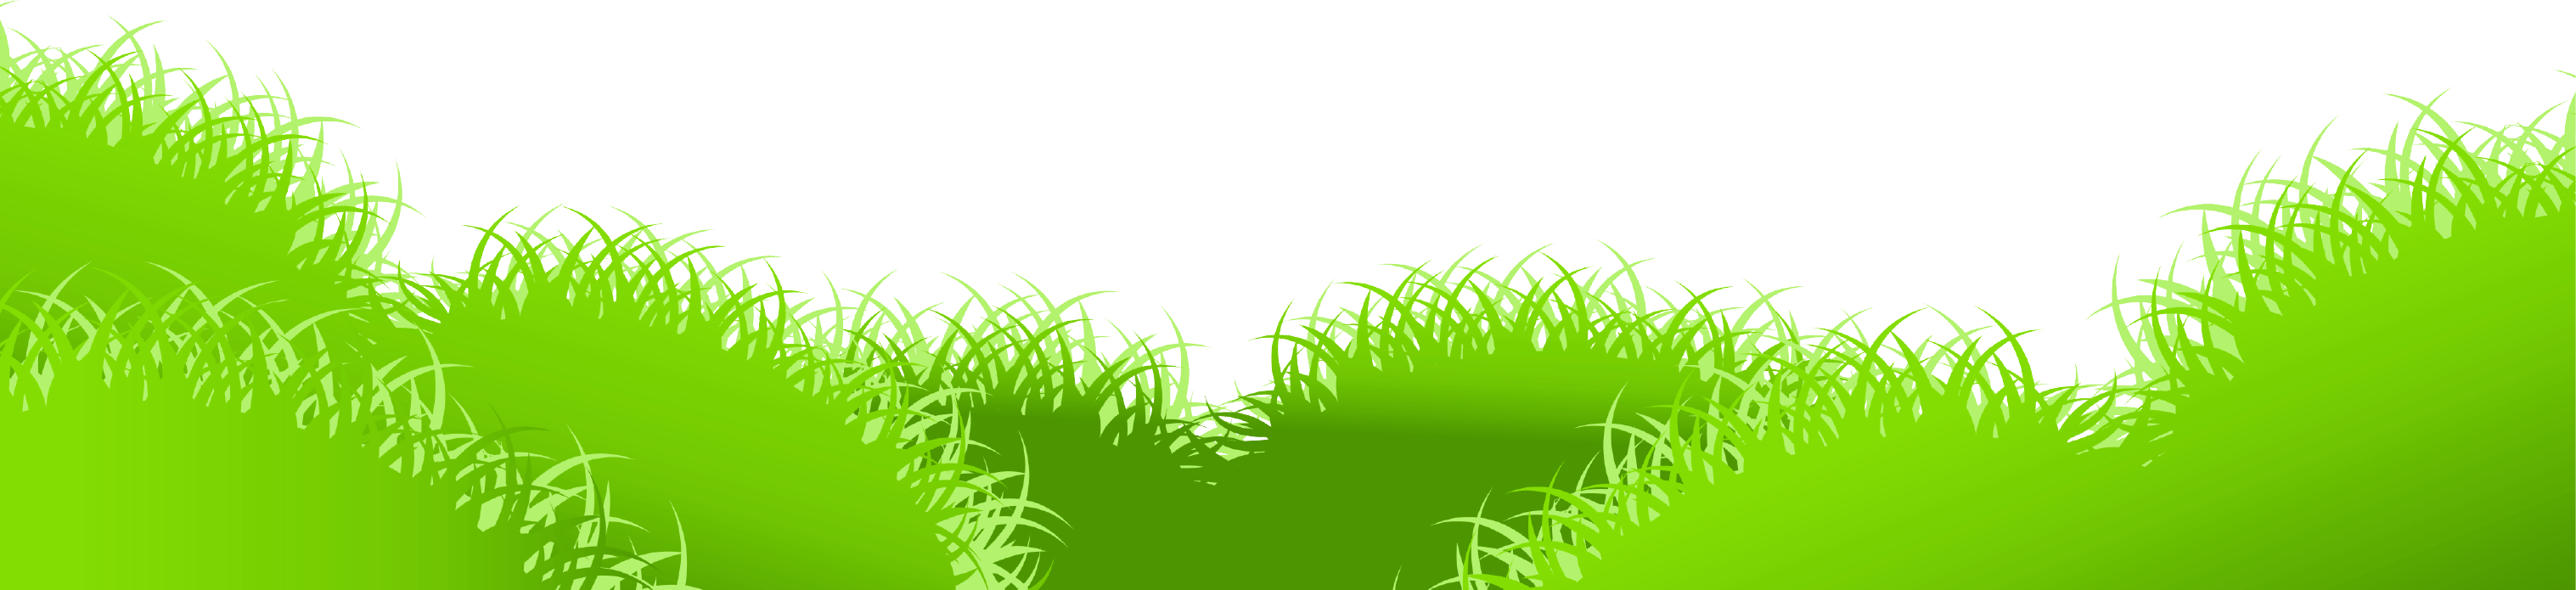 Grass clipart picture 0 2